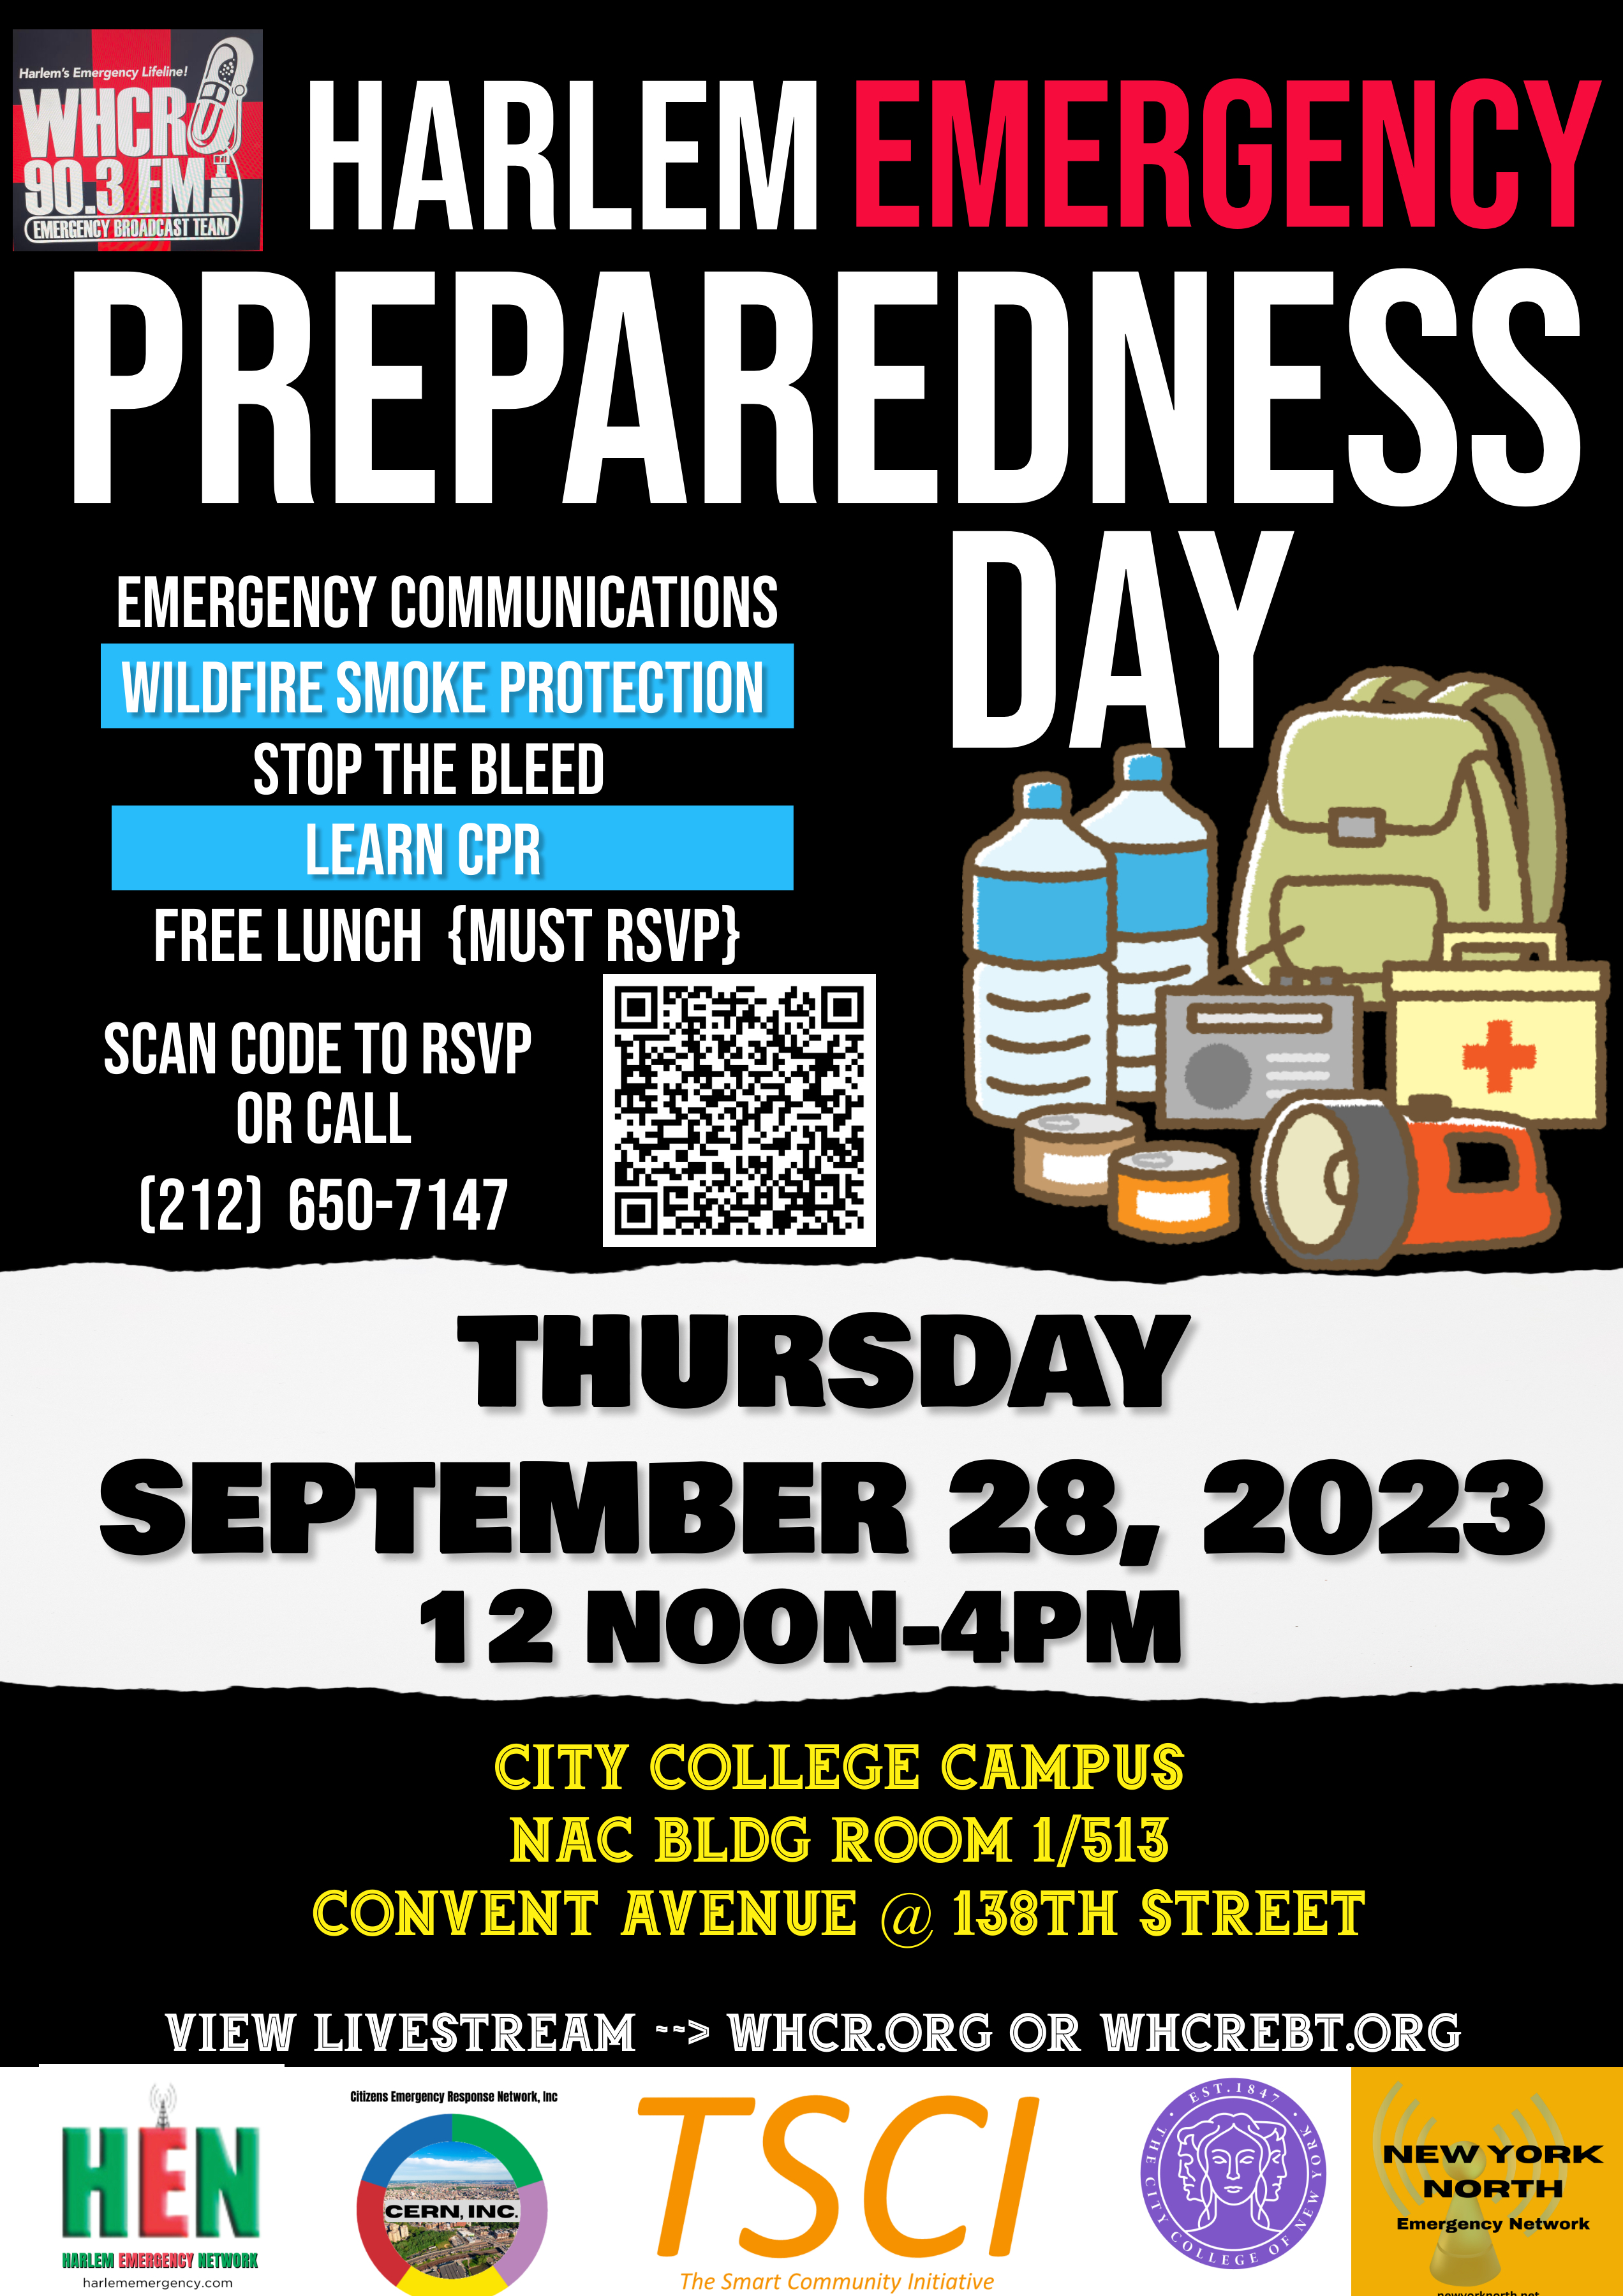 Get ready for WHCR’s Harlem Emergency Preparedness Day, where we’ll equip you with essential skills to handle any crisis that comes your way. Date and time  Thursday, September 28 from 12 – 4pm